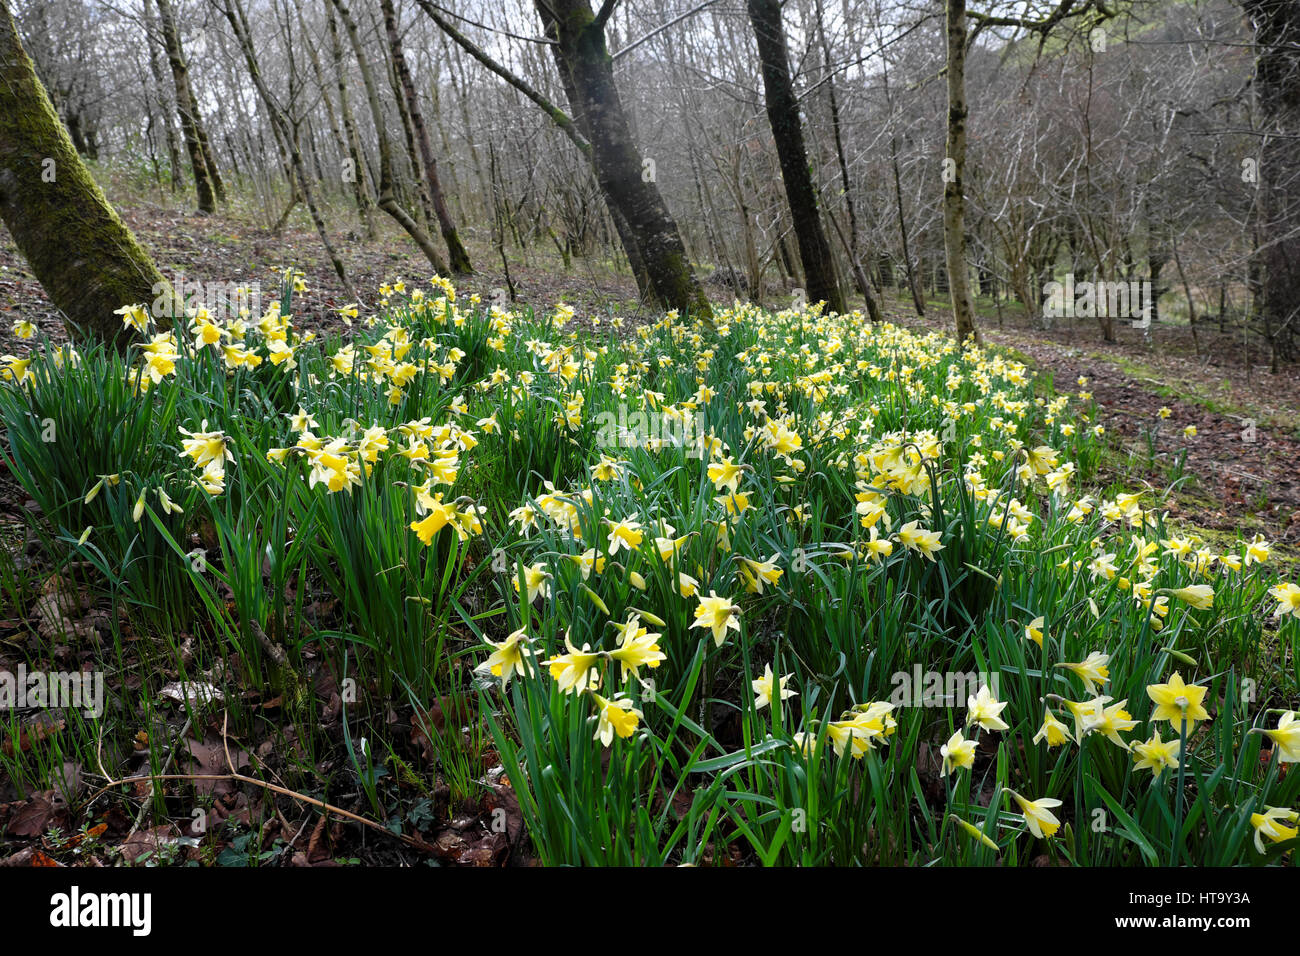 Daffodils growing wild flowering on a sloping bank in March in a woodland in Carmarthenshire Wales UK  KATHY DEWITT Stock Photo